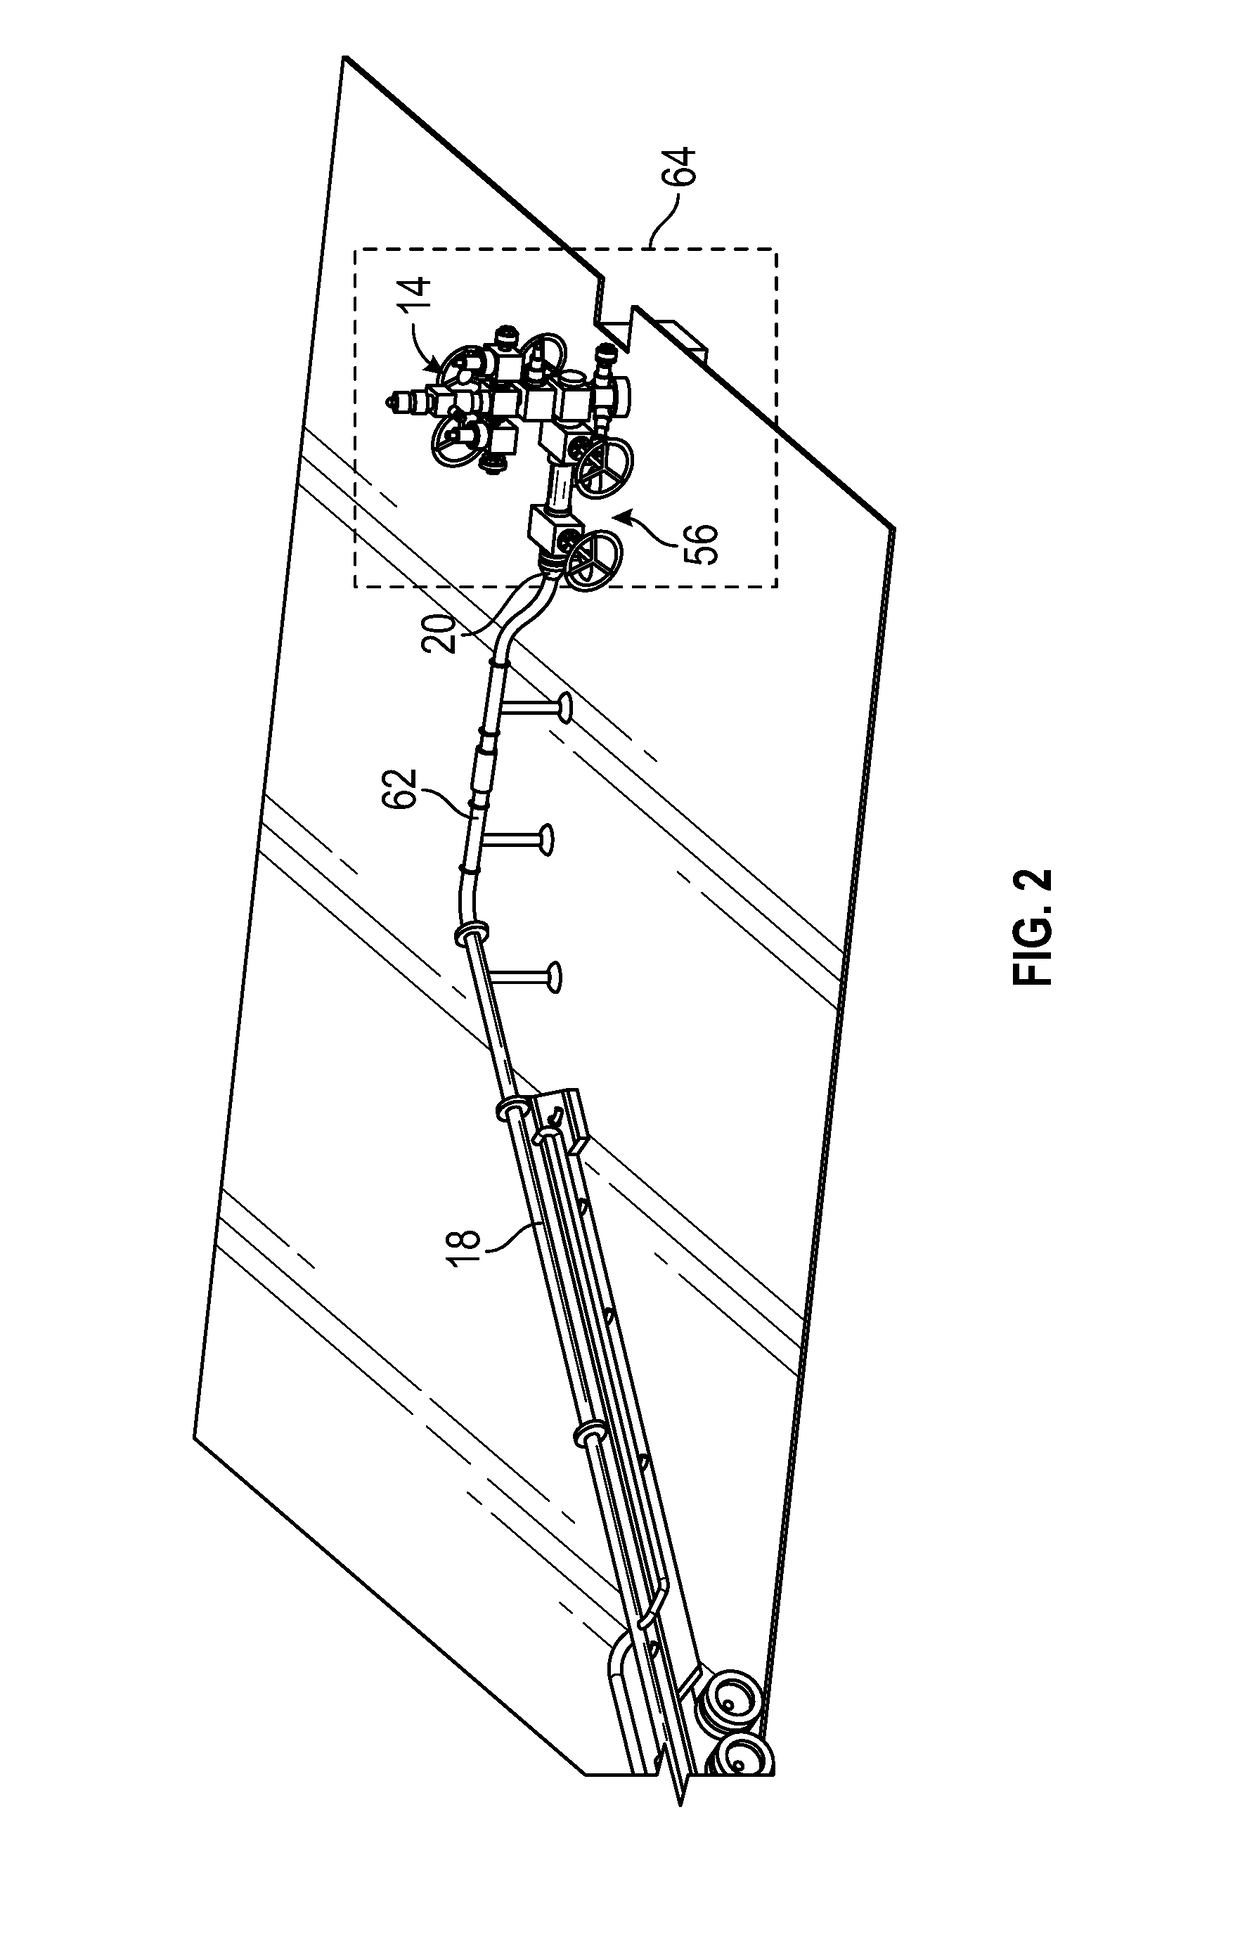 Systems and methods for fracturing a multiple well pad